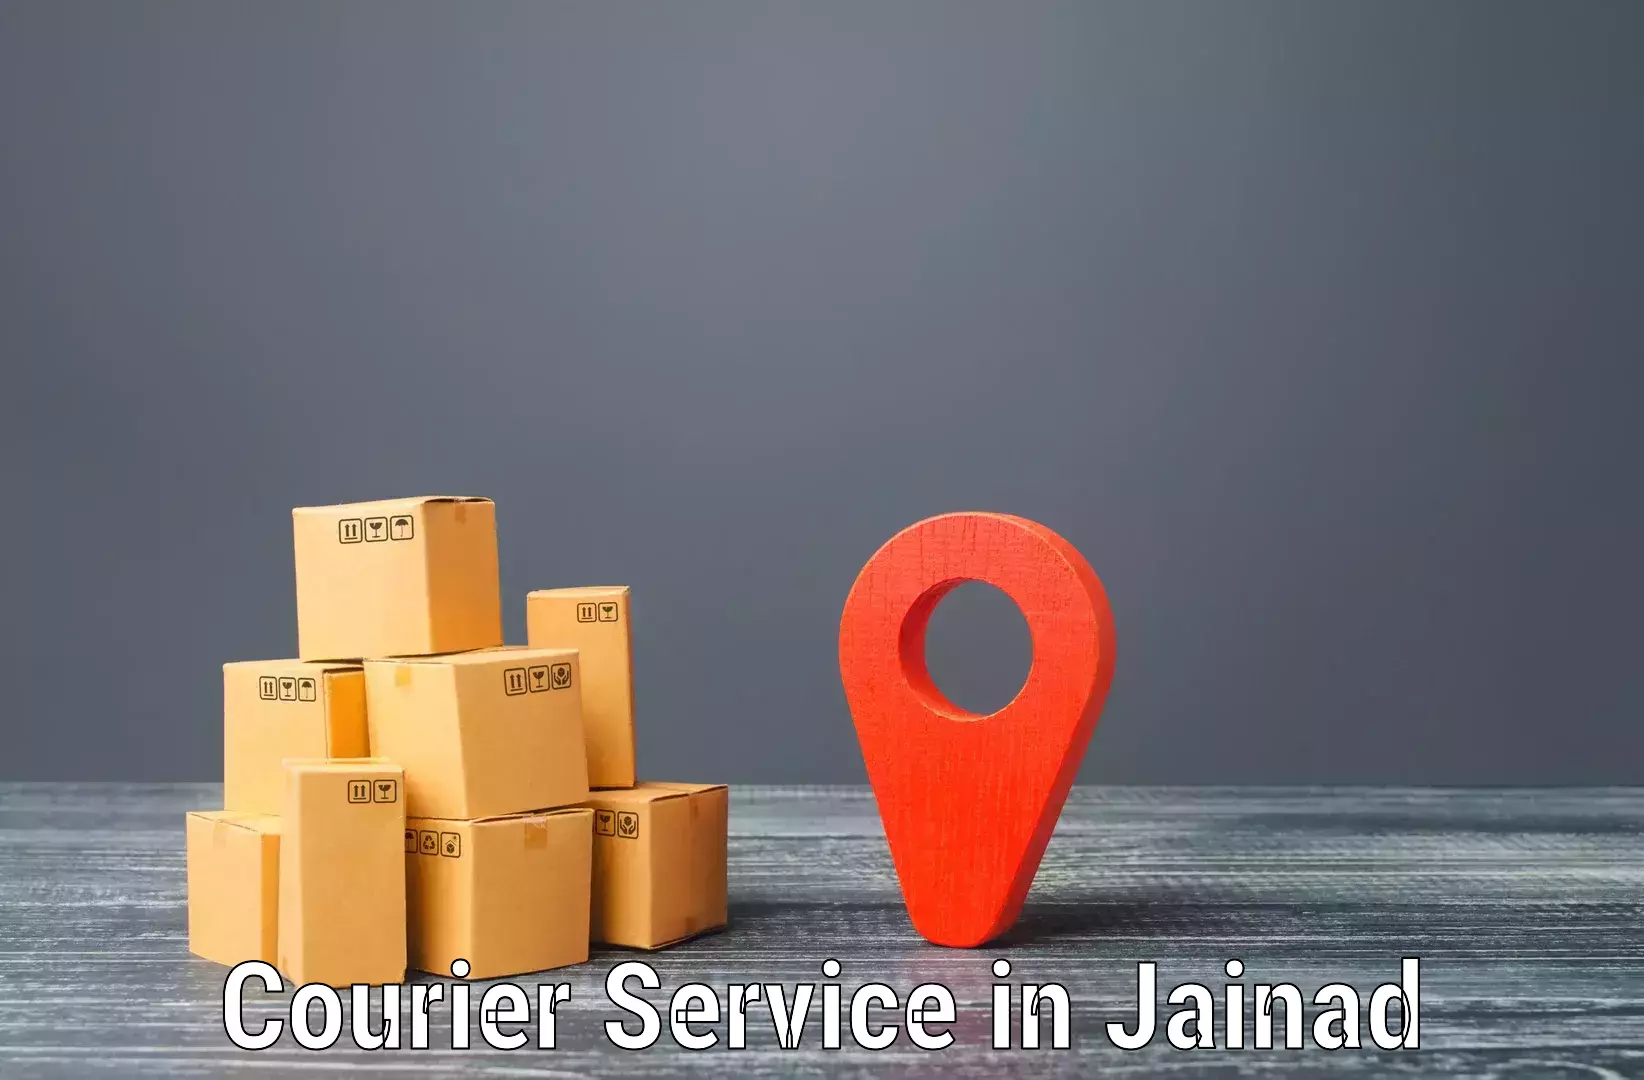 Sustainable courier practices in Jainad